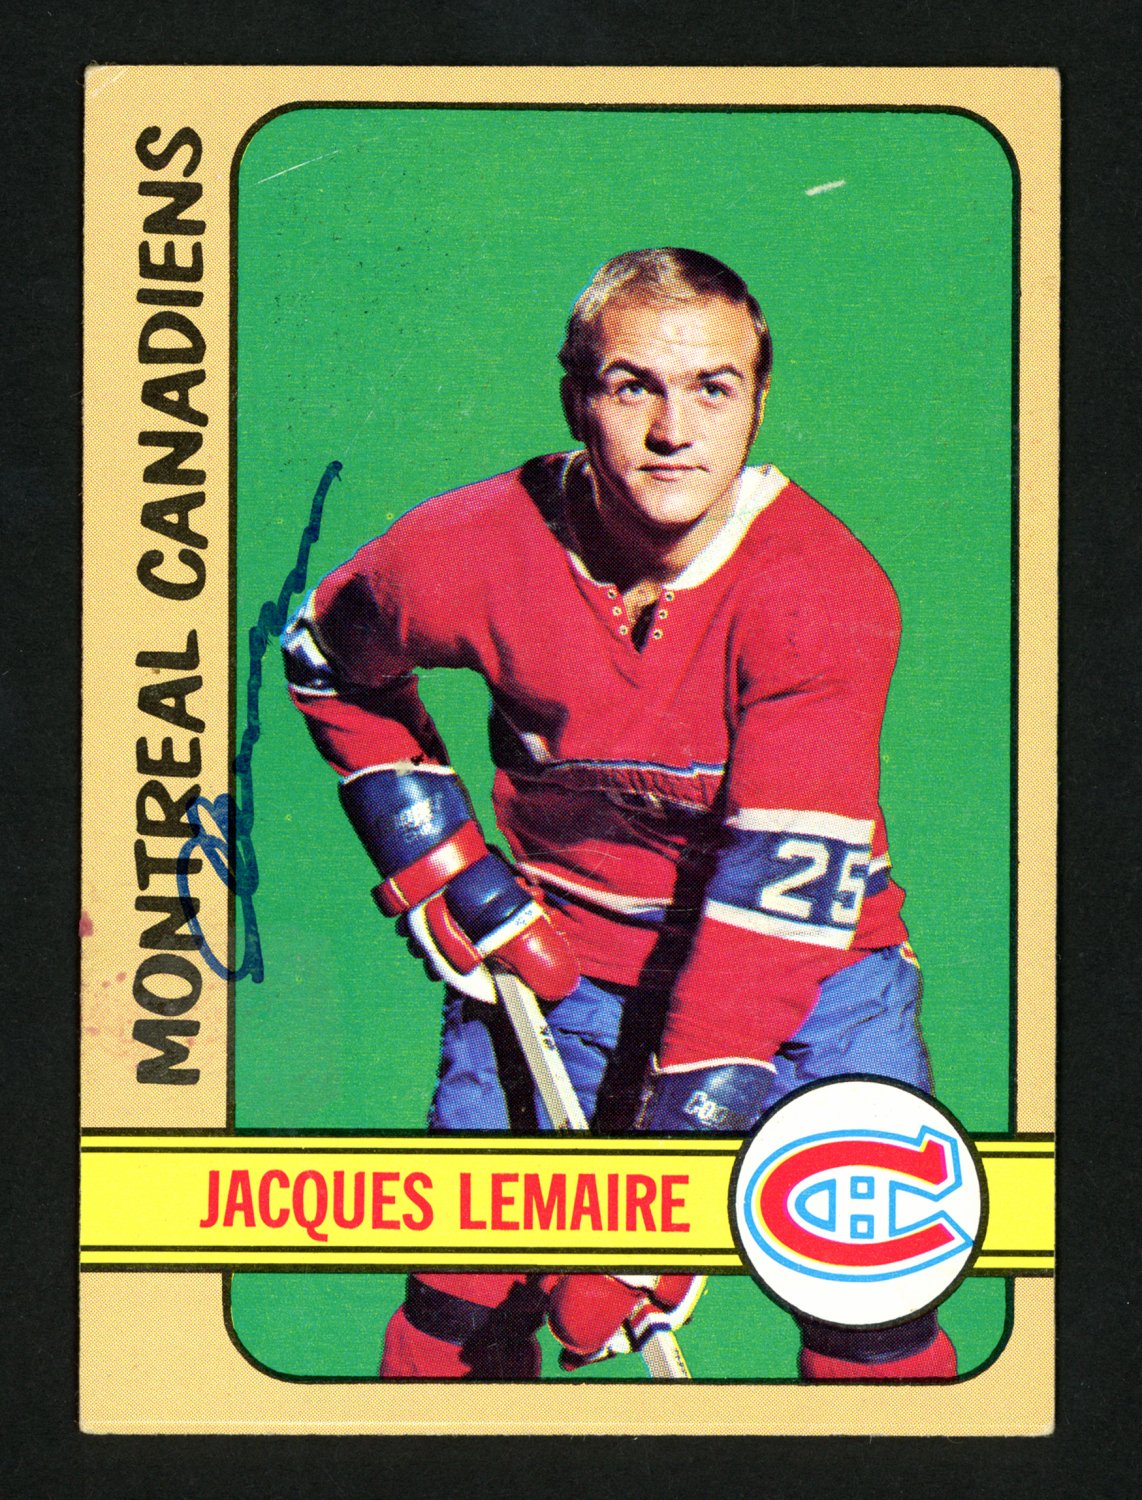 Jacques Lemaire Autographed Signed 1972-73 Topps Card #25 Montreal ...